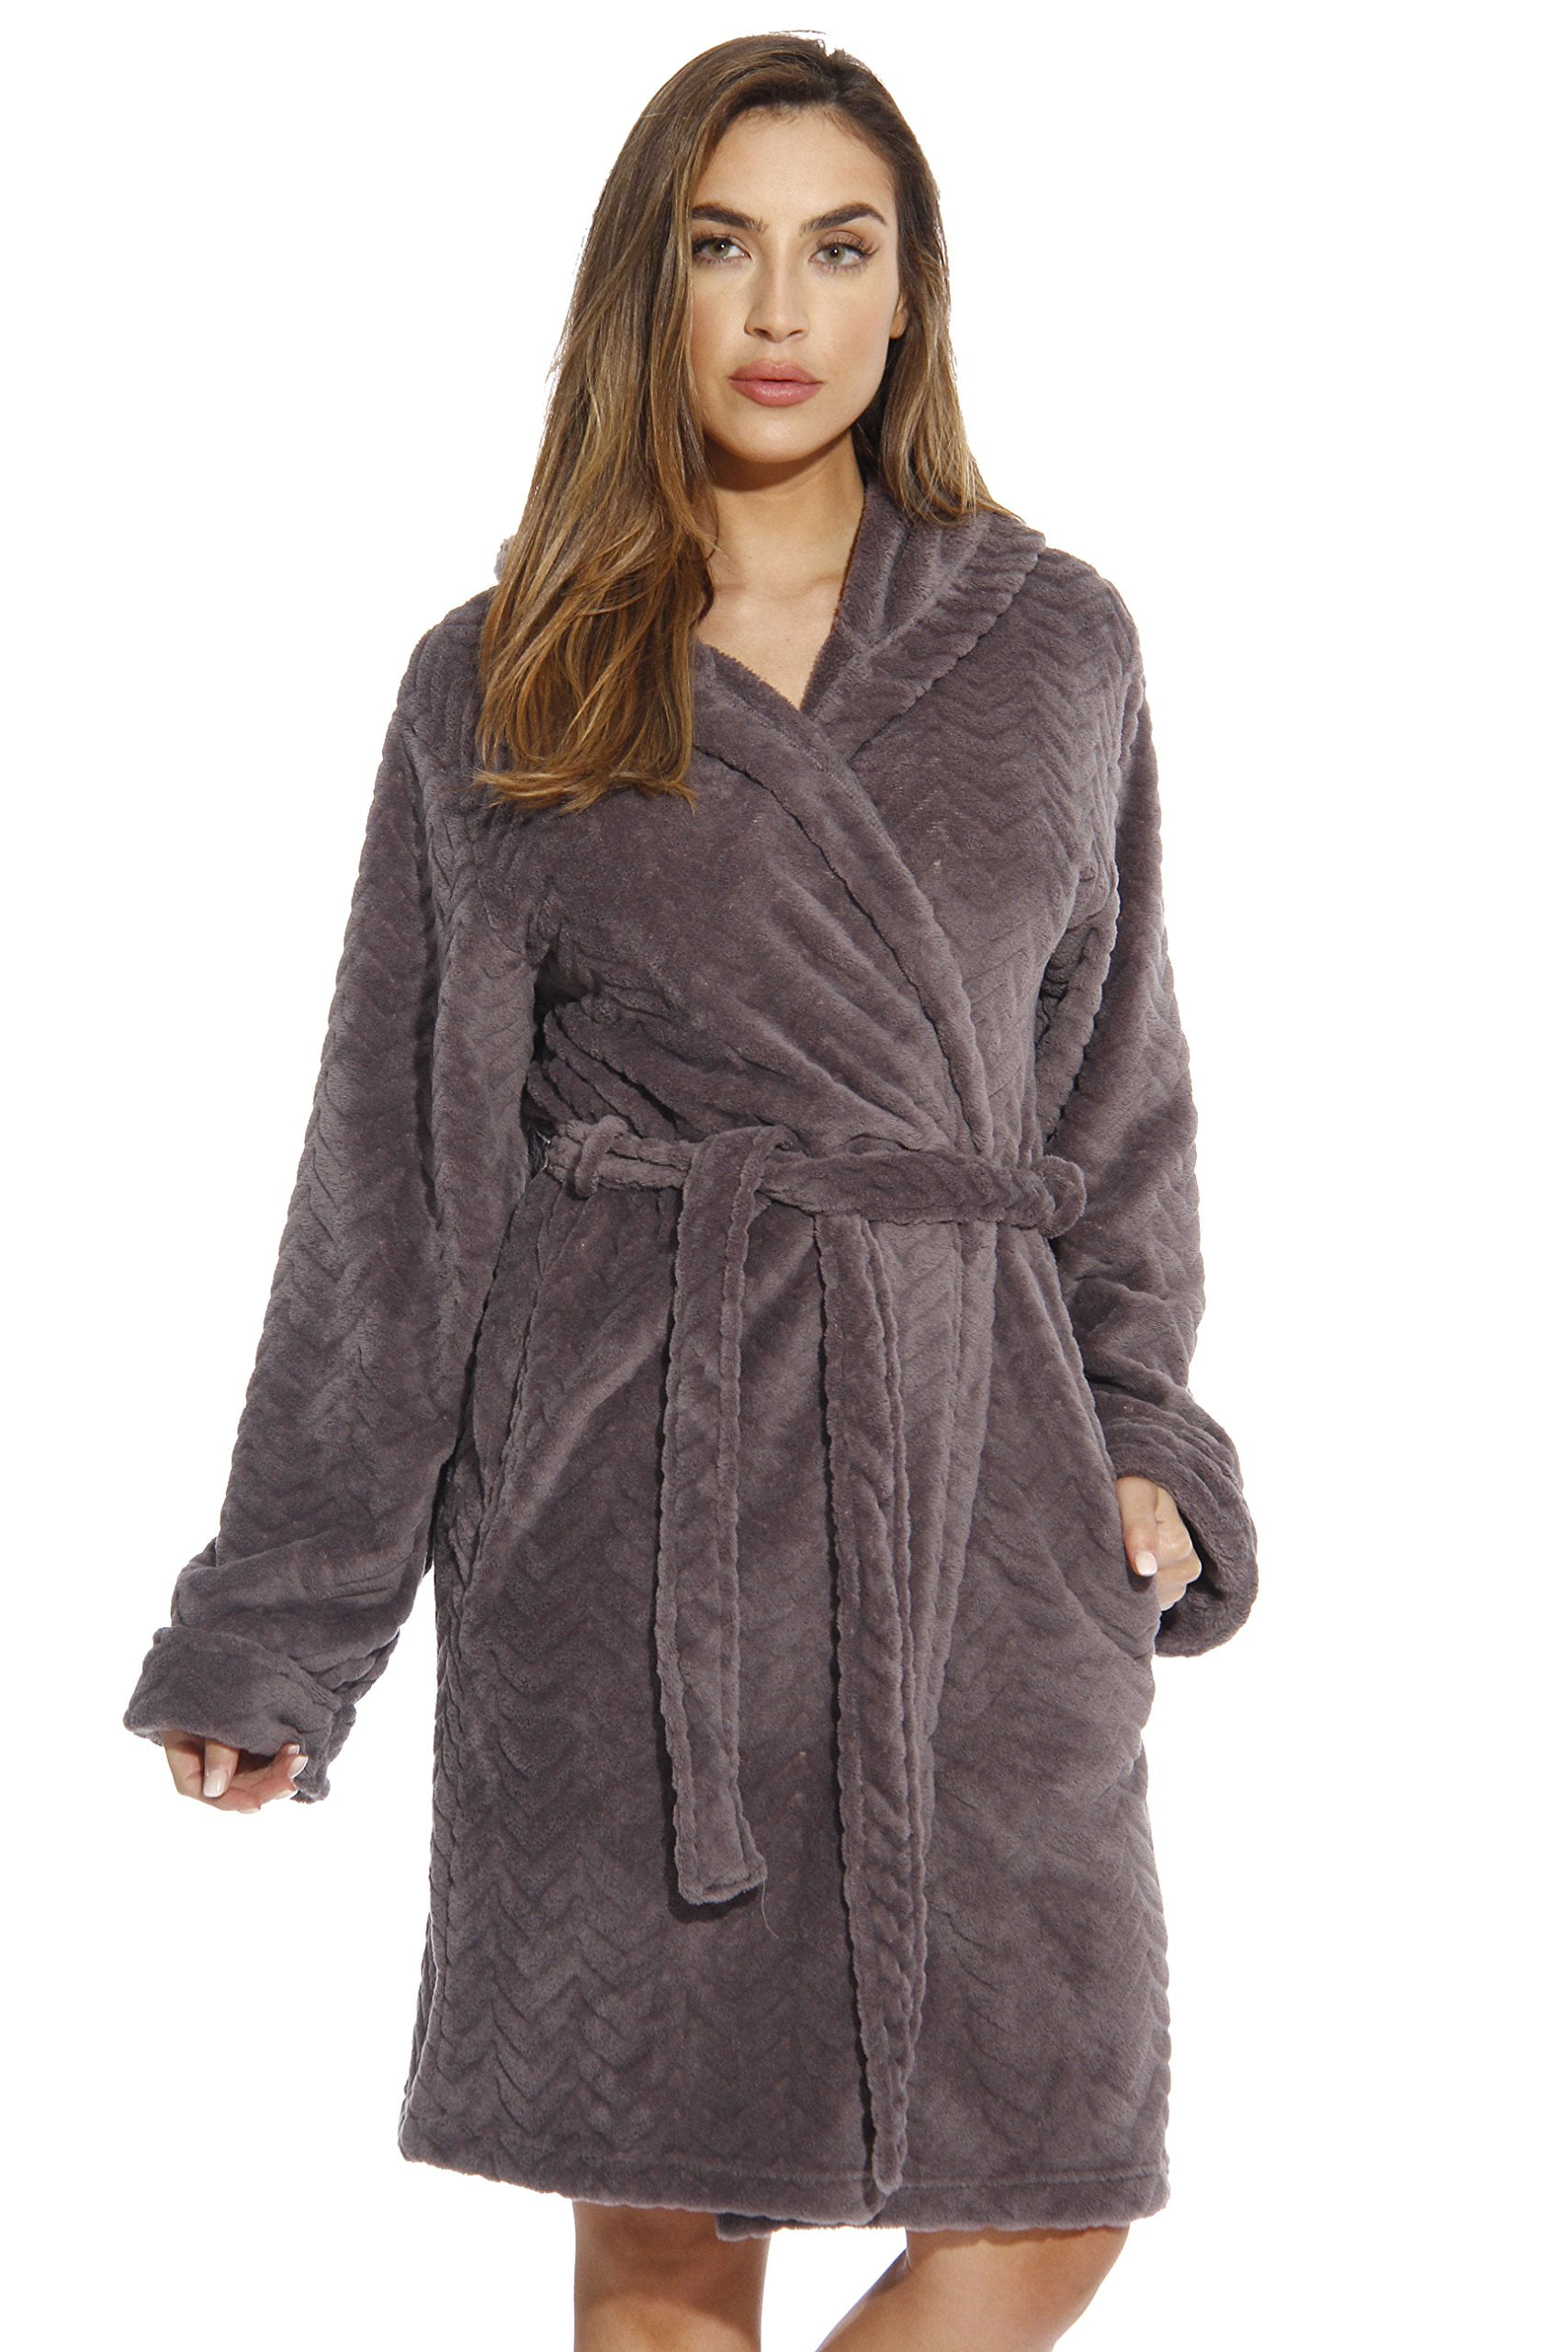 Just Love 6341-Navy-L Kimono Robe/Hooded Bath Robes for Women (Charcoal ...